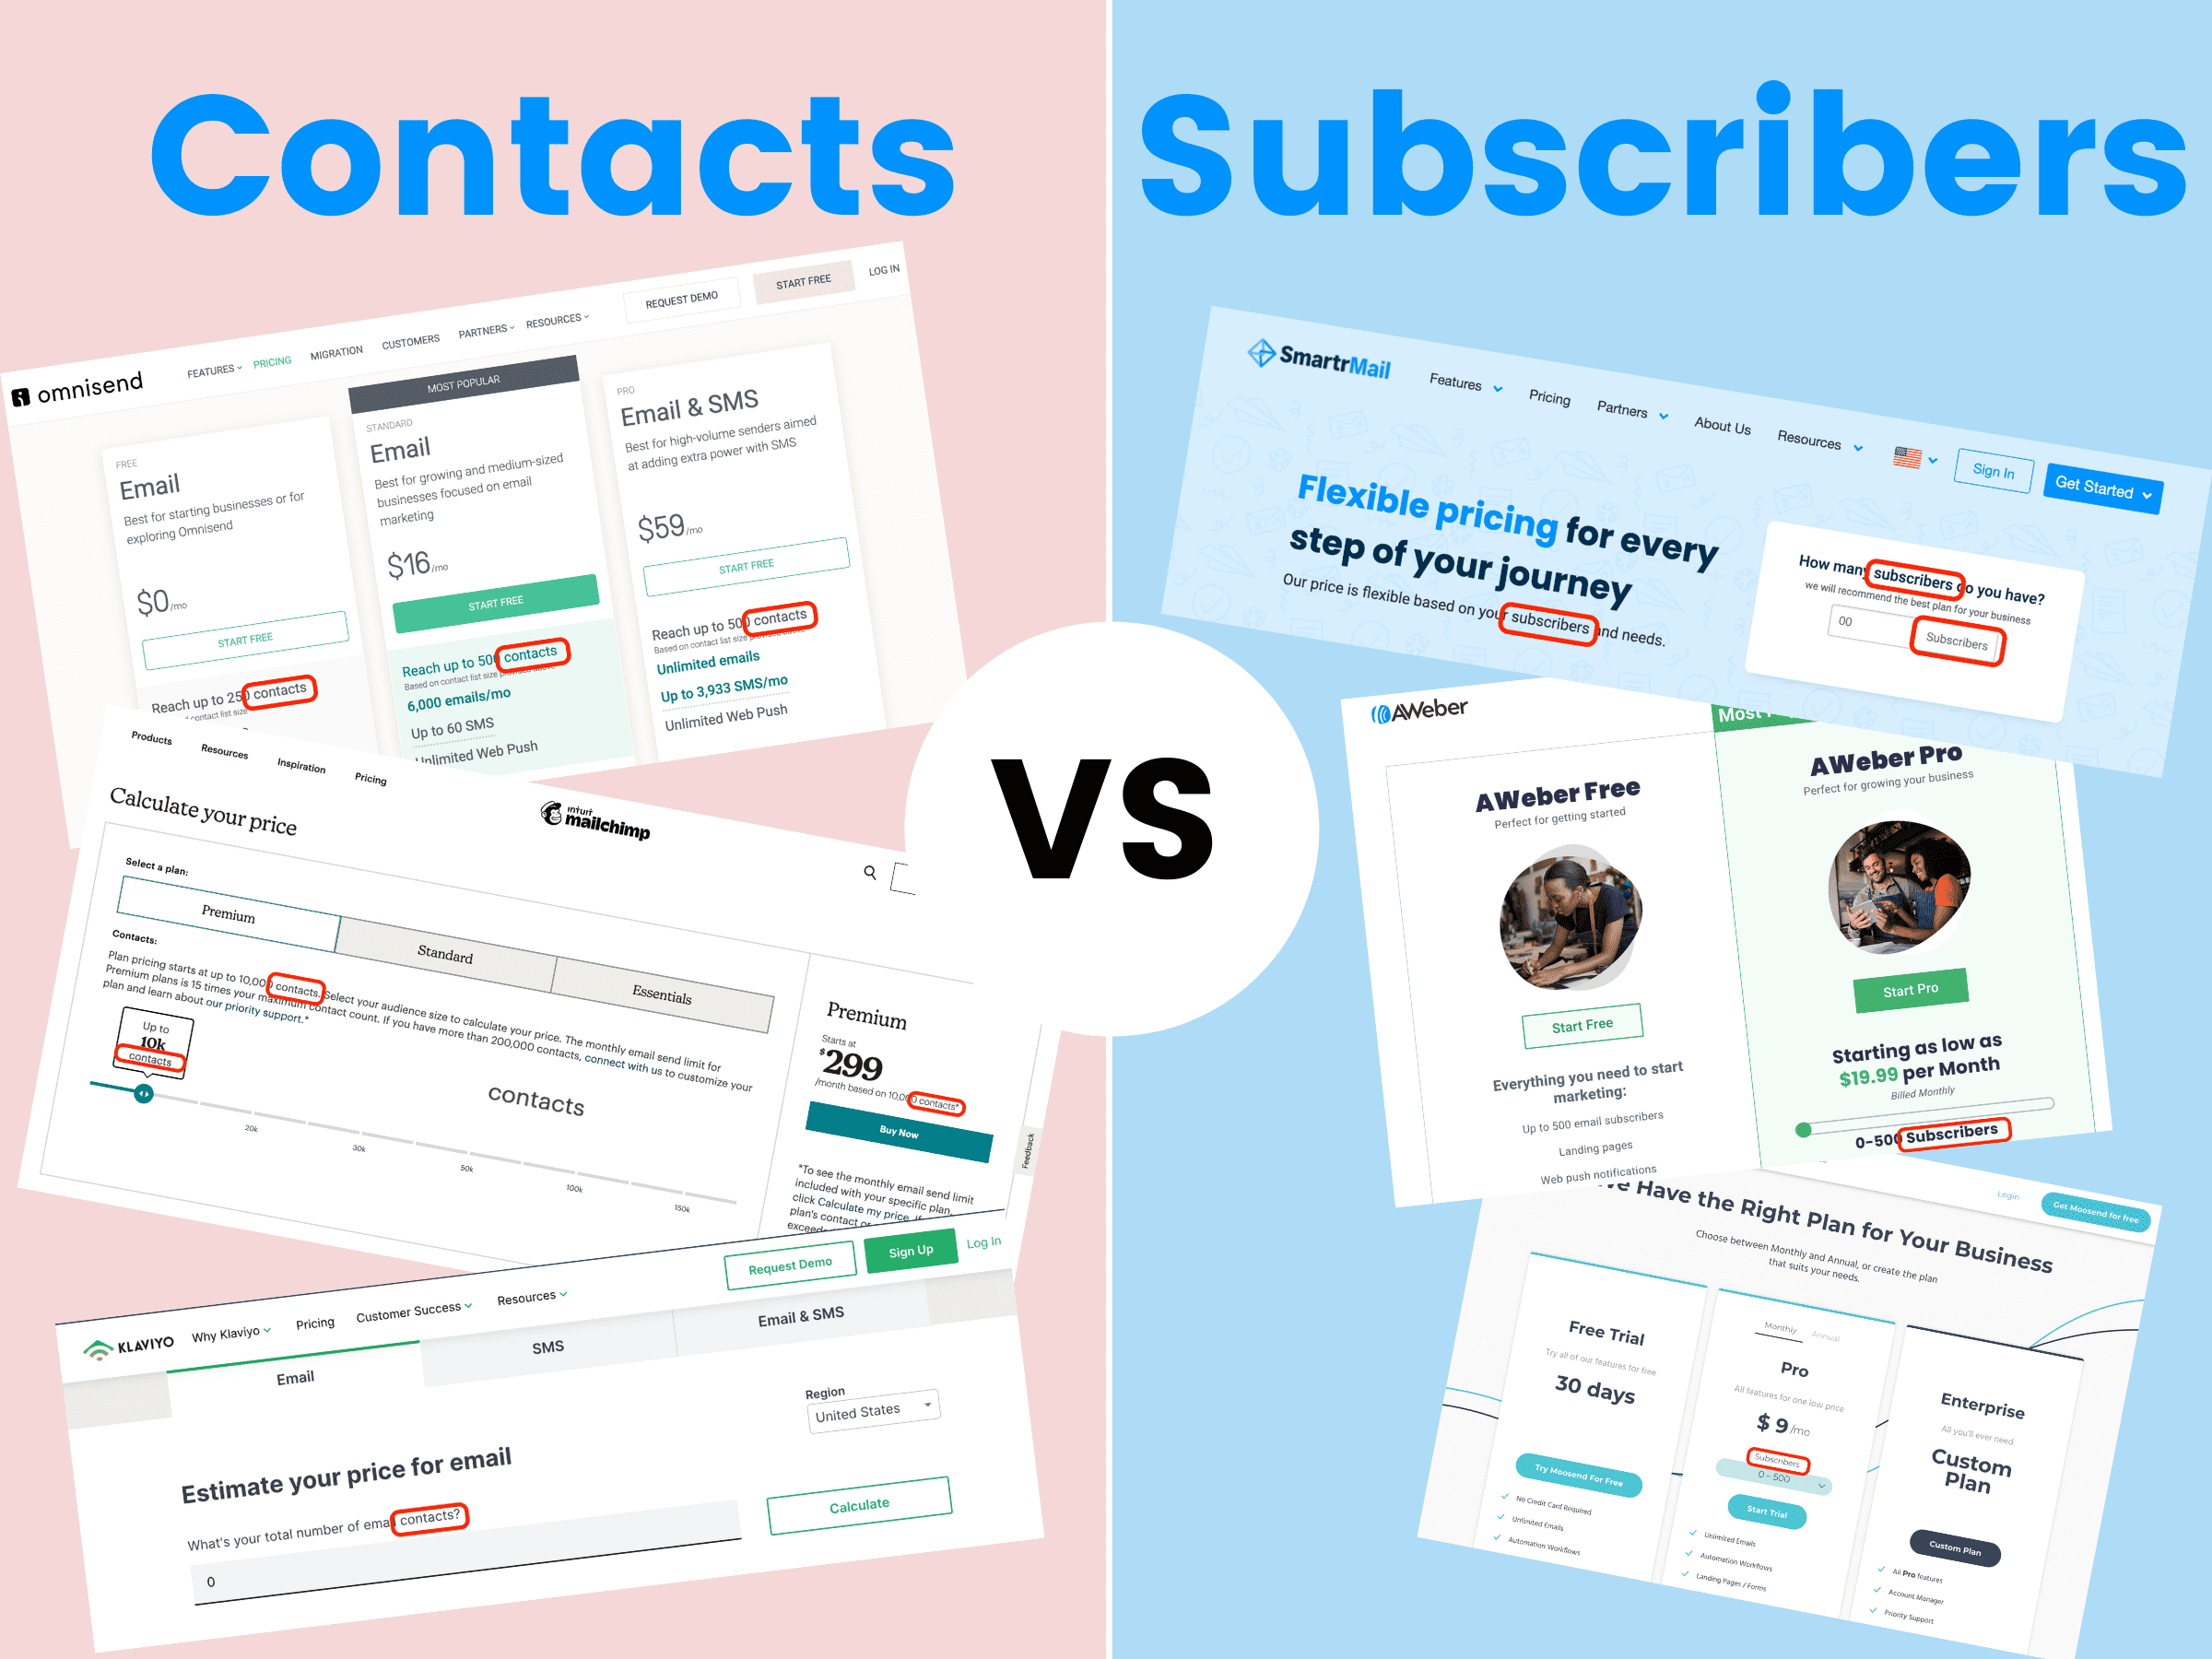 Contact VS subscribers